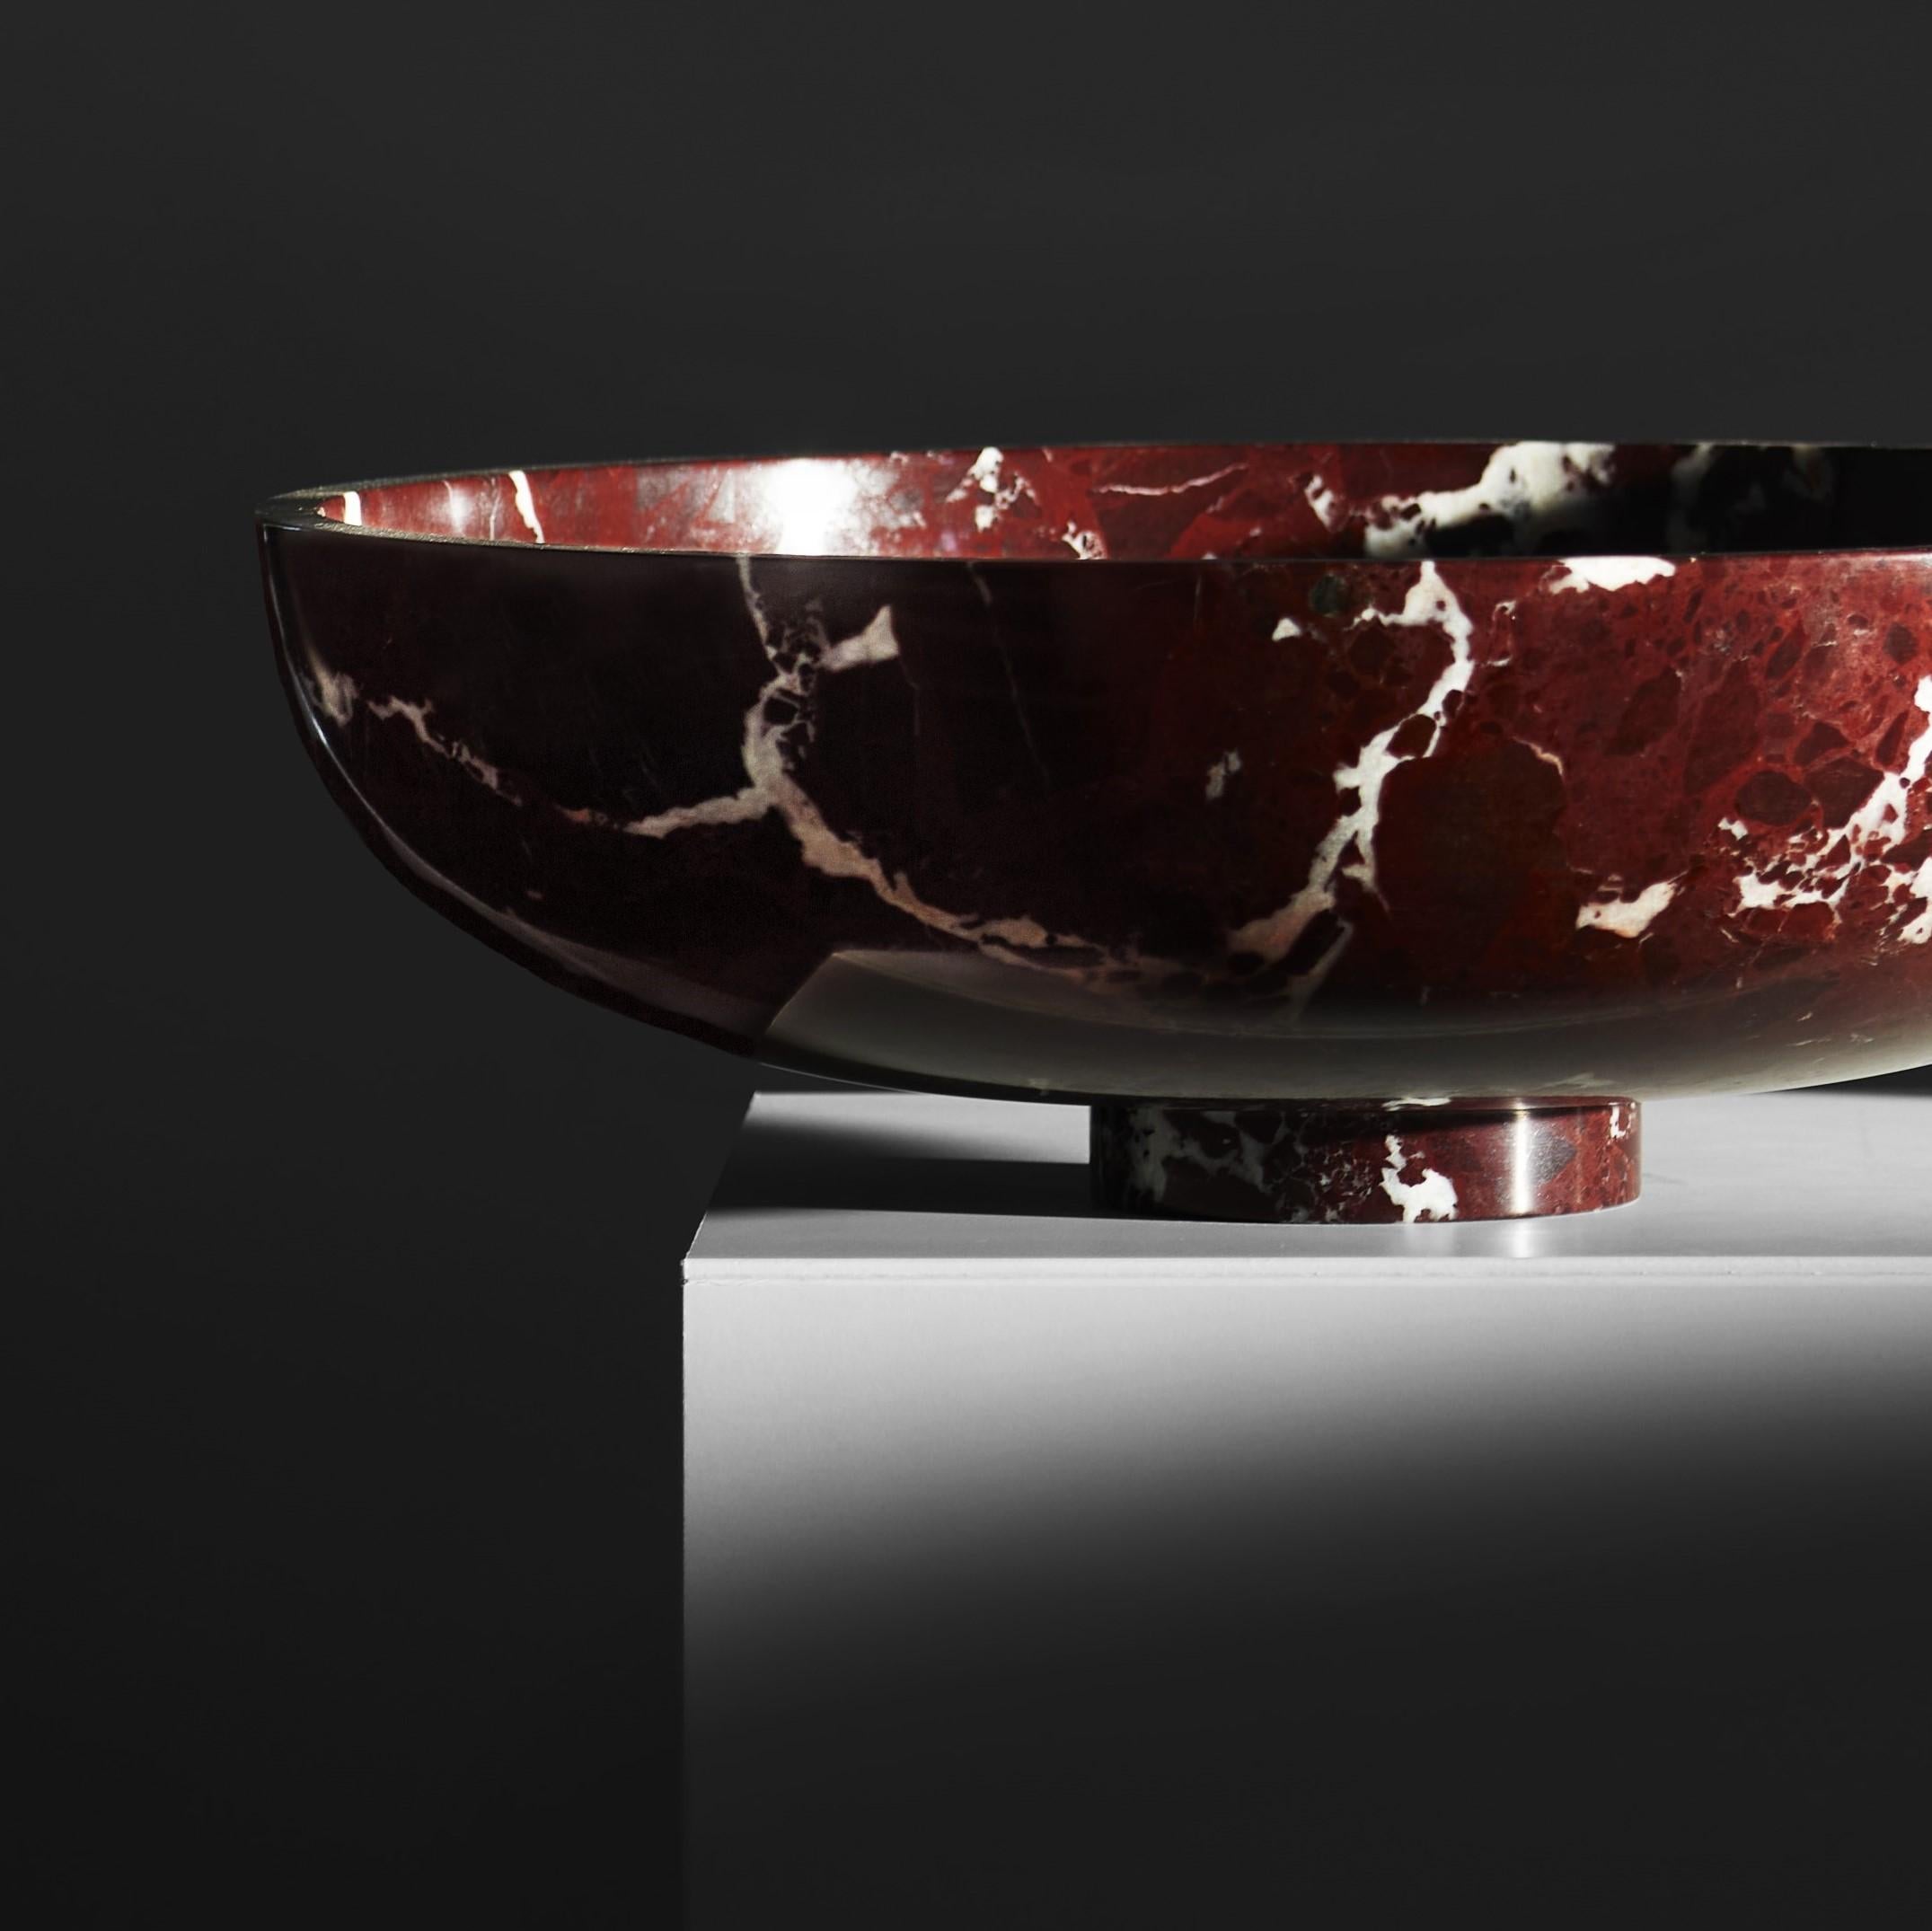 Twosidestory bowl XL by Lisette Rützou
Dimensions: D 40 cm
Materials: Levanto Bordeaux Marble

 Lisette Rützou’s design is motivated by an urge to articulate a story. Inspired by the beauty of materials, form and architecture, each design is an